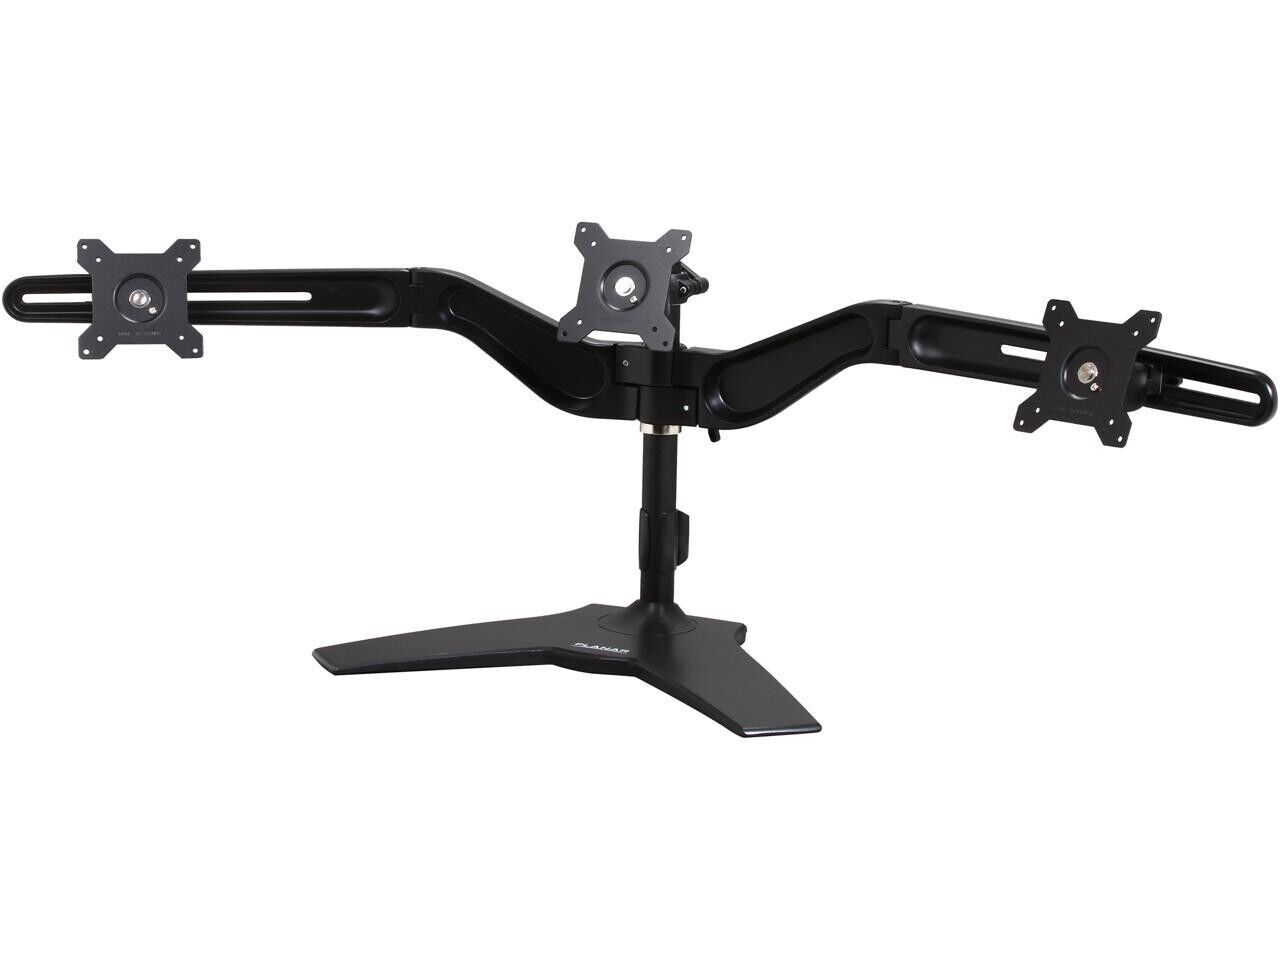 Planar 997-6035-00 Triple Monitor Stand - 17" to 24" Screen Support - 58.20 lb